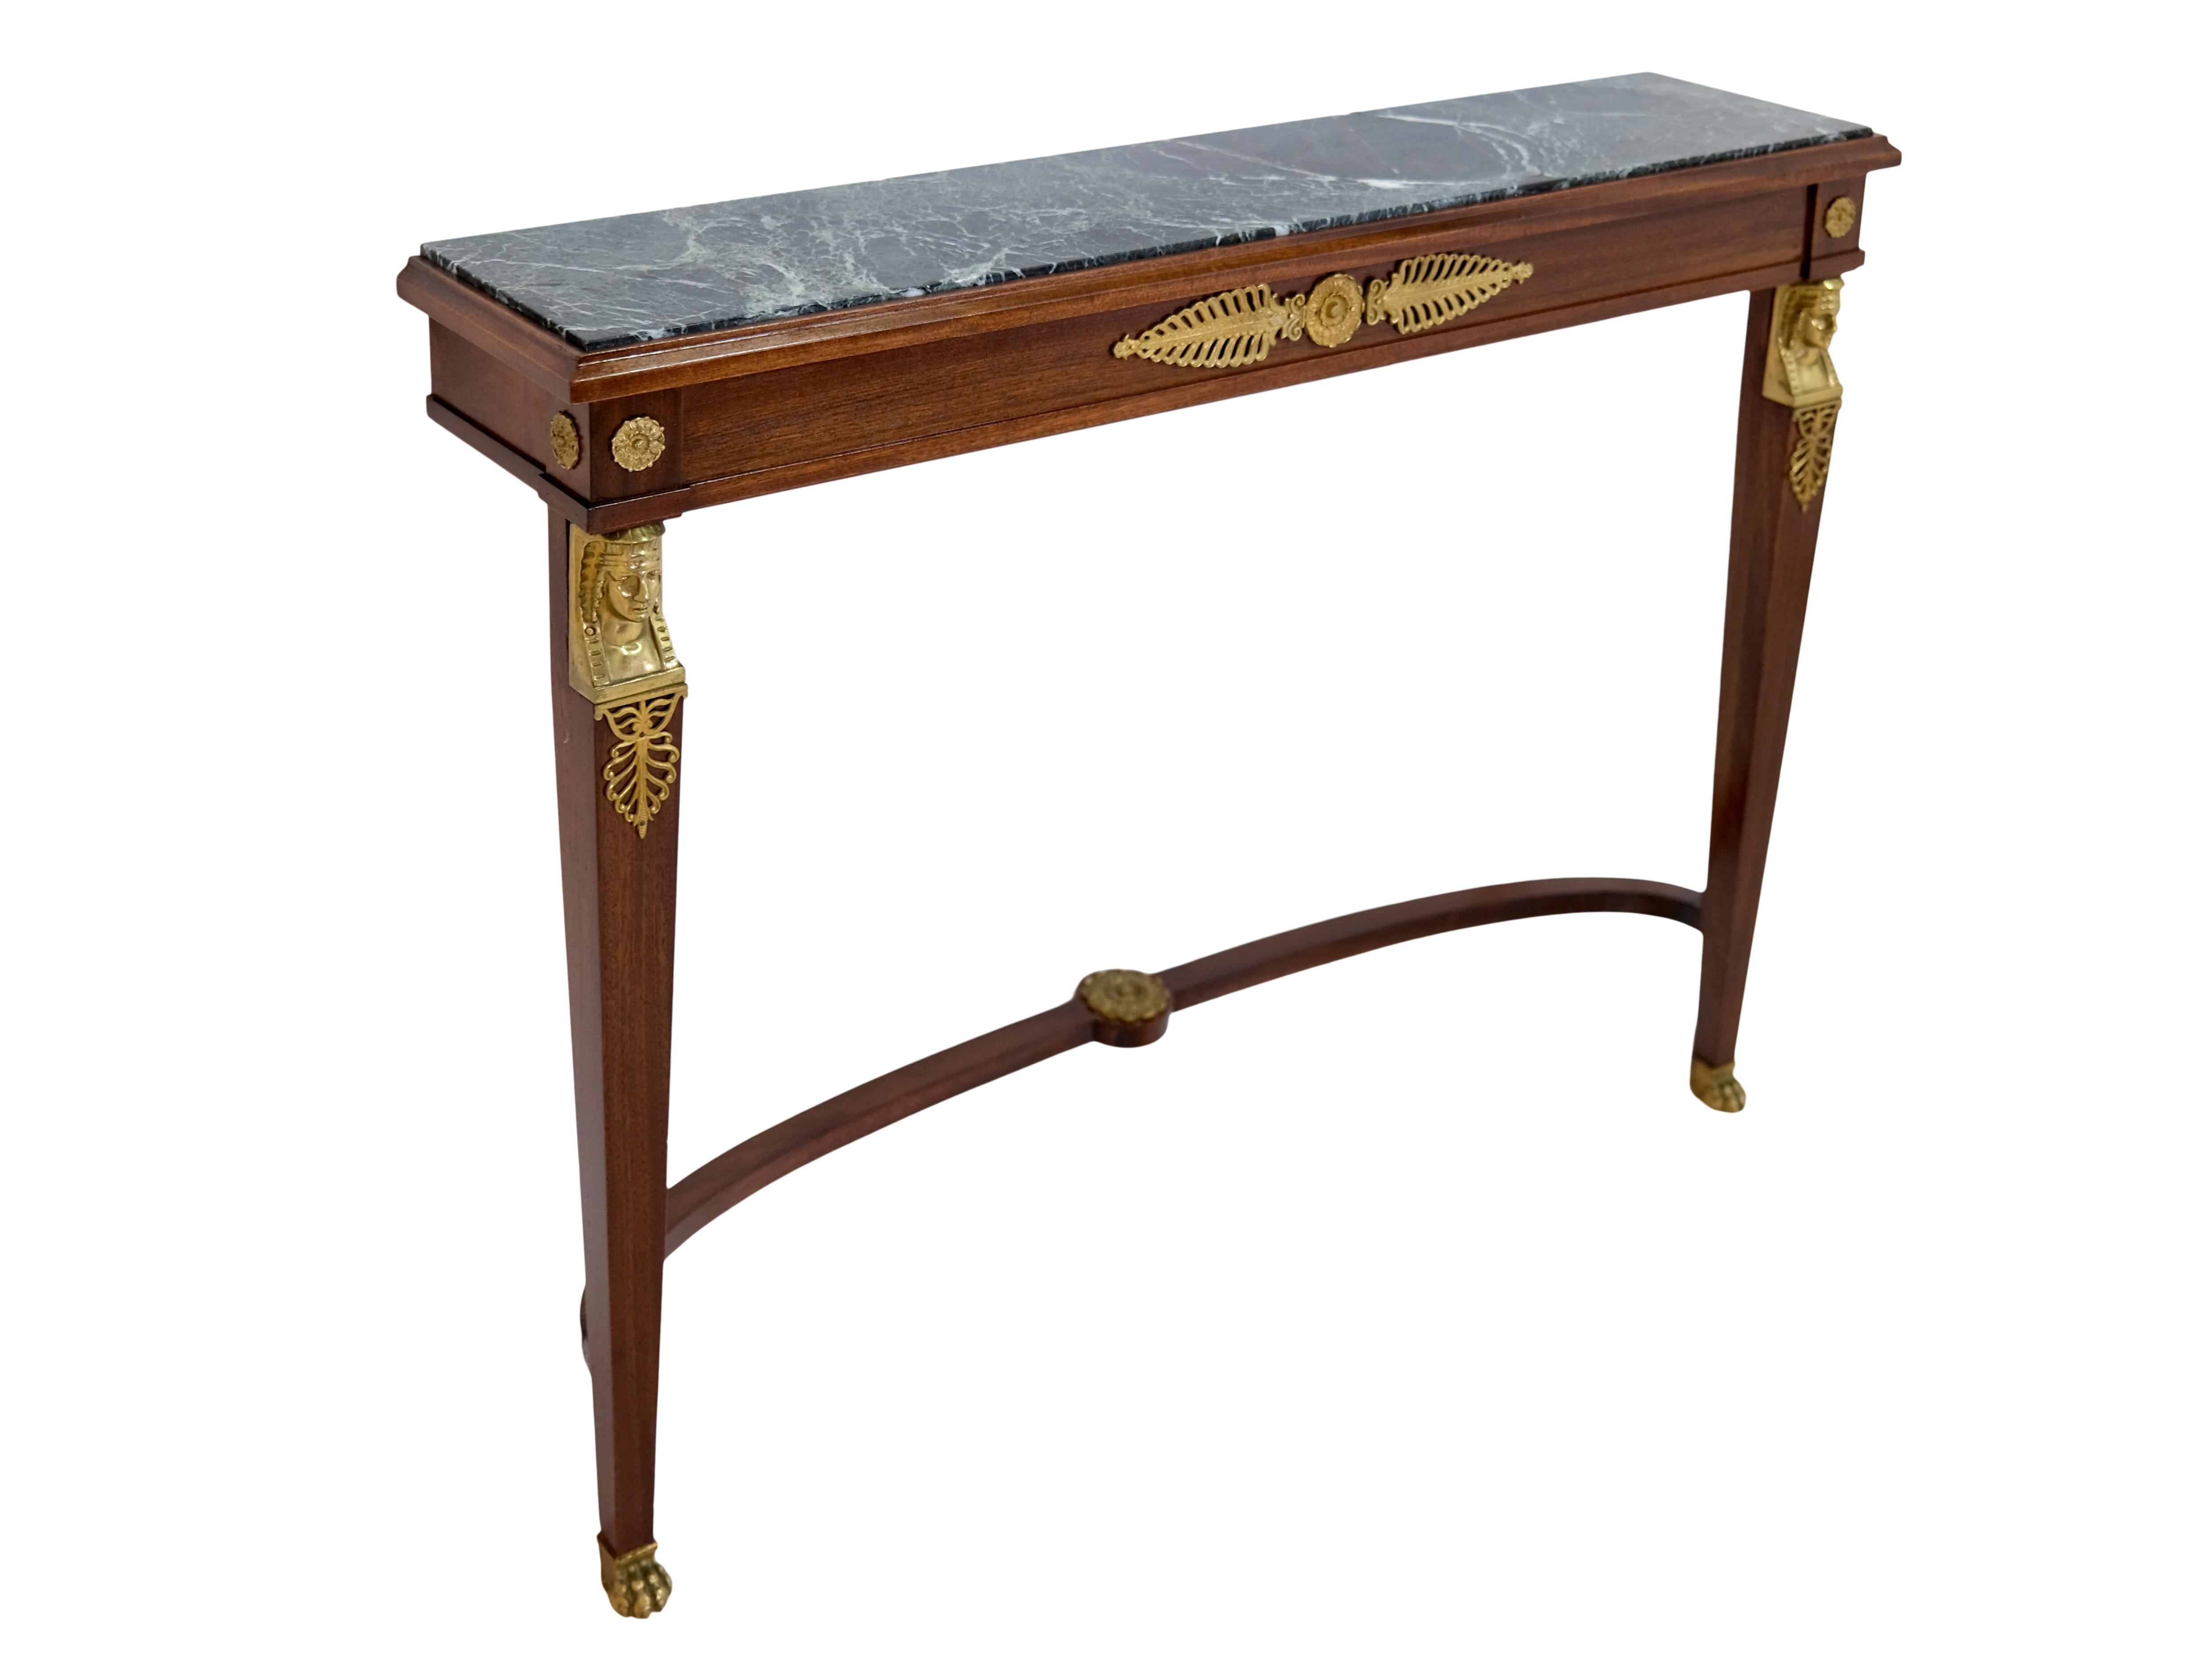 Polished French 1850/60s Empire Console Table in Mahogany with Marble Top For Sale